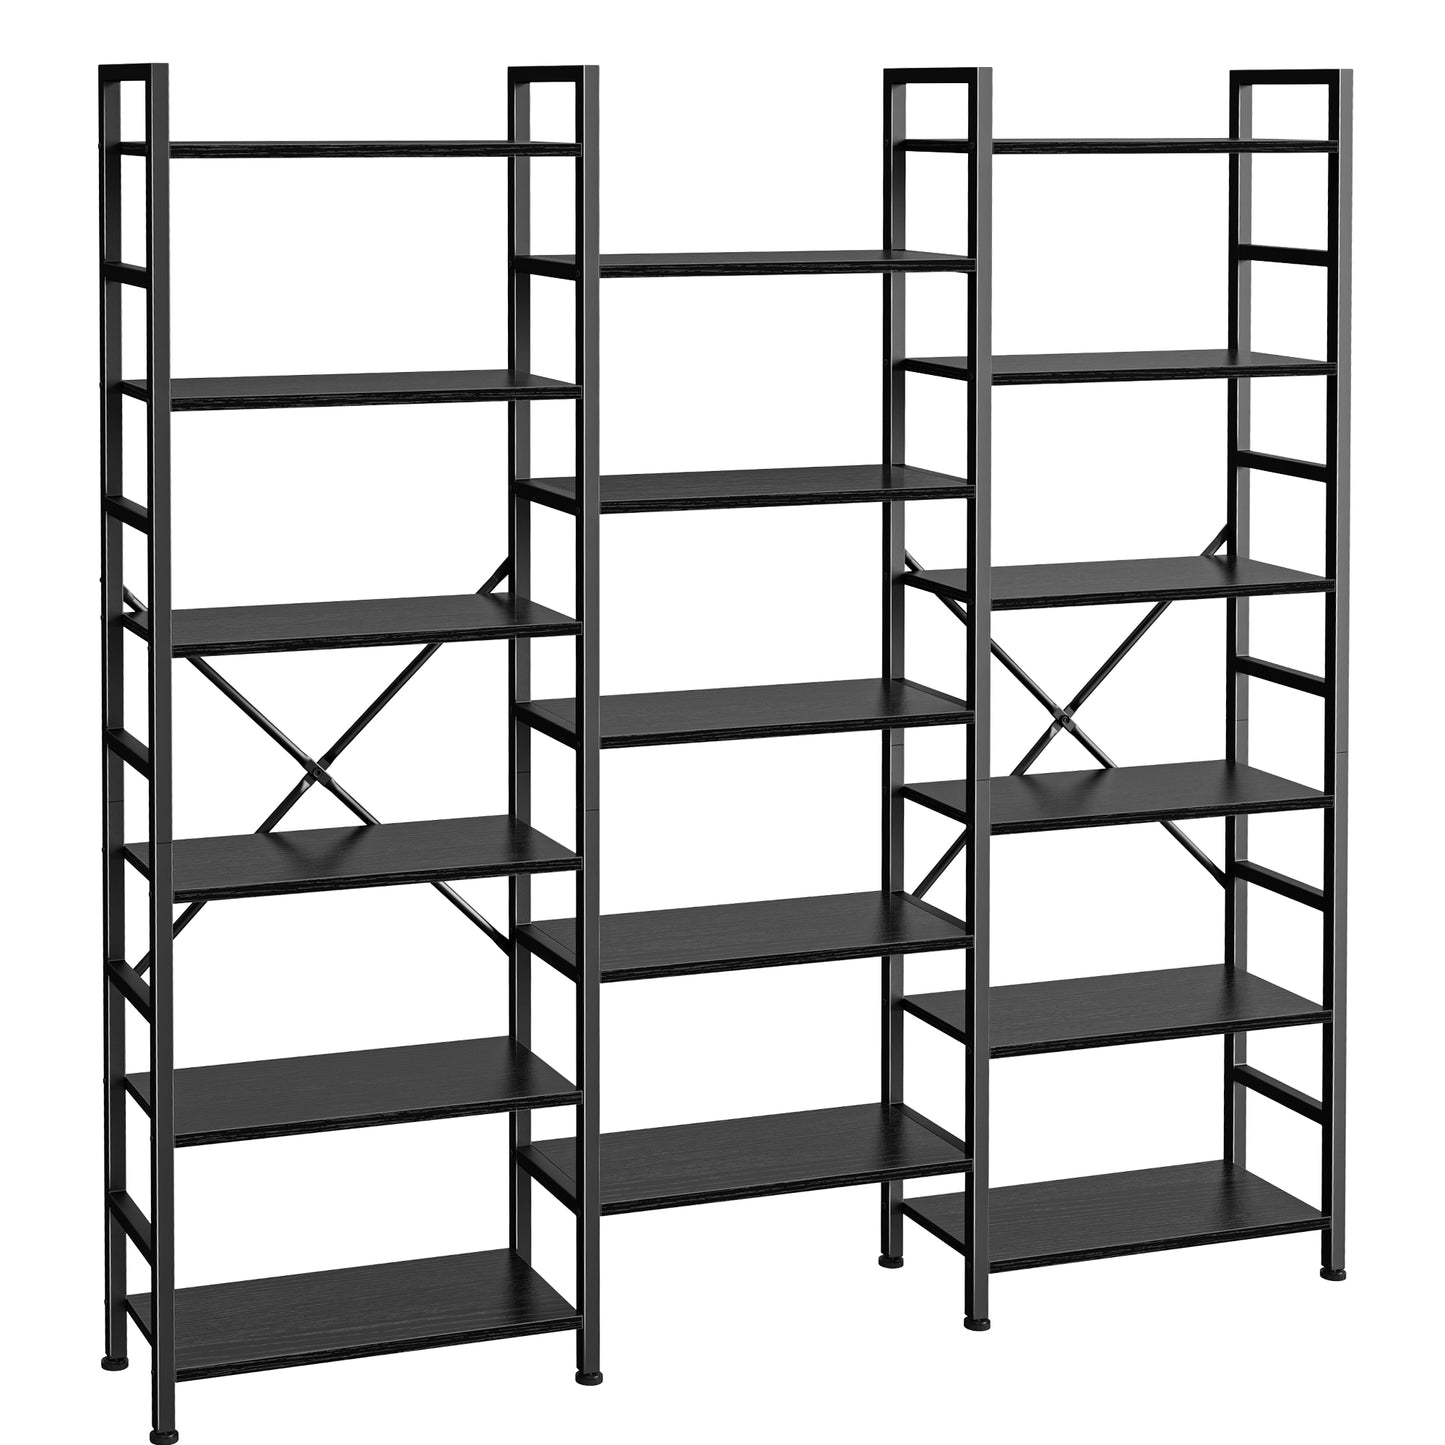 SUPERJARE Triple 6 Tier Bookshelf, Bookcase with 17 Open Display Shelves, Wide Book Shelf Book Case for Home & Office, Black